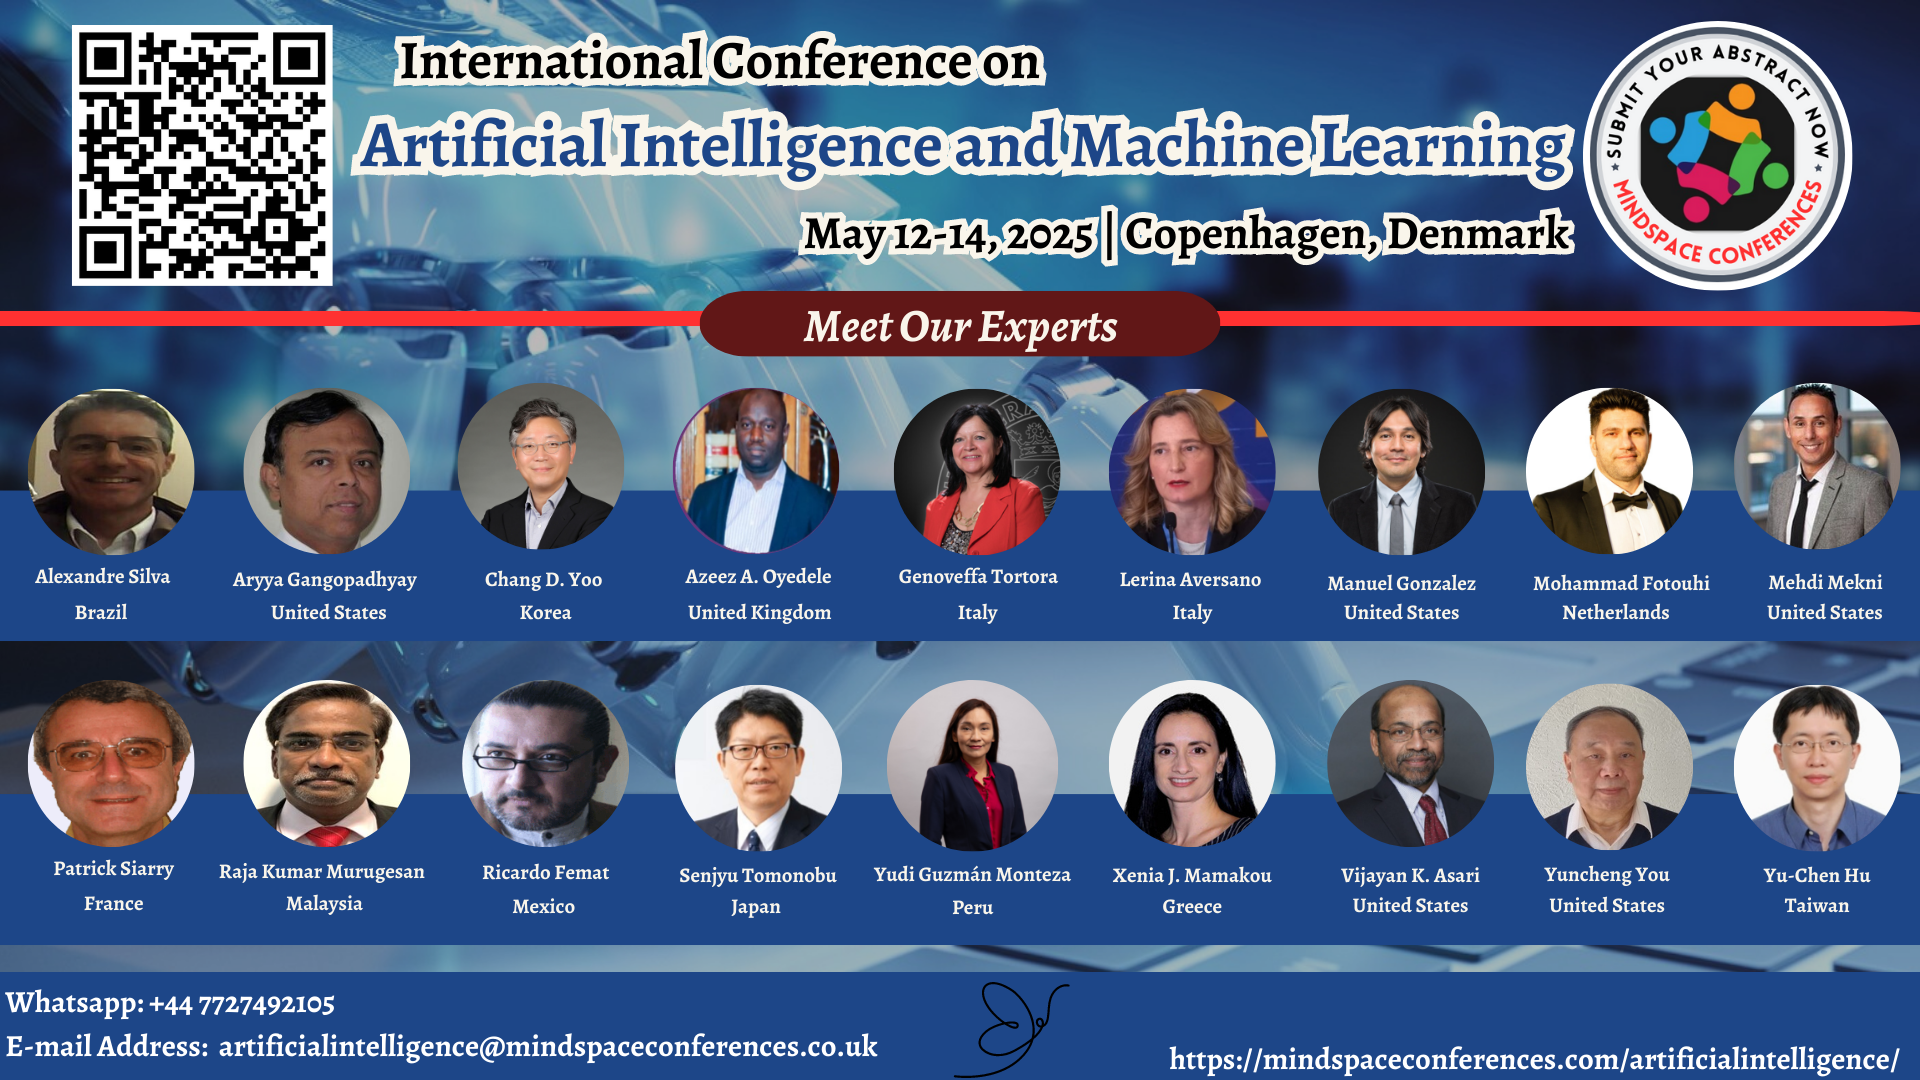 International Conference on ARTIFICIAL INTELLIGENCE AND MACHINE LEARNING